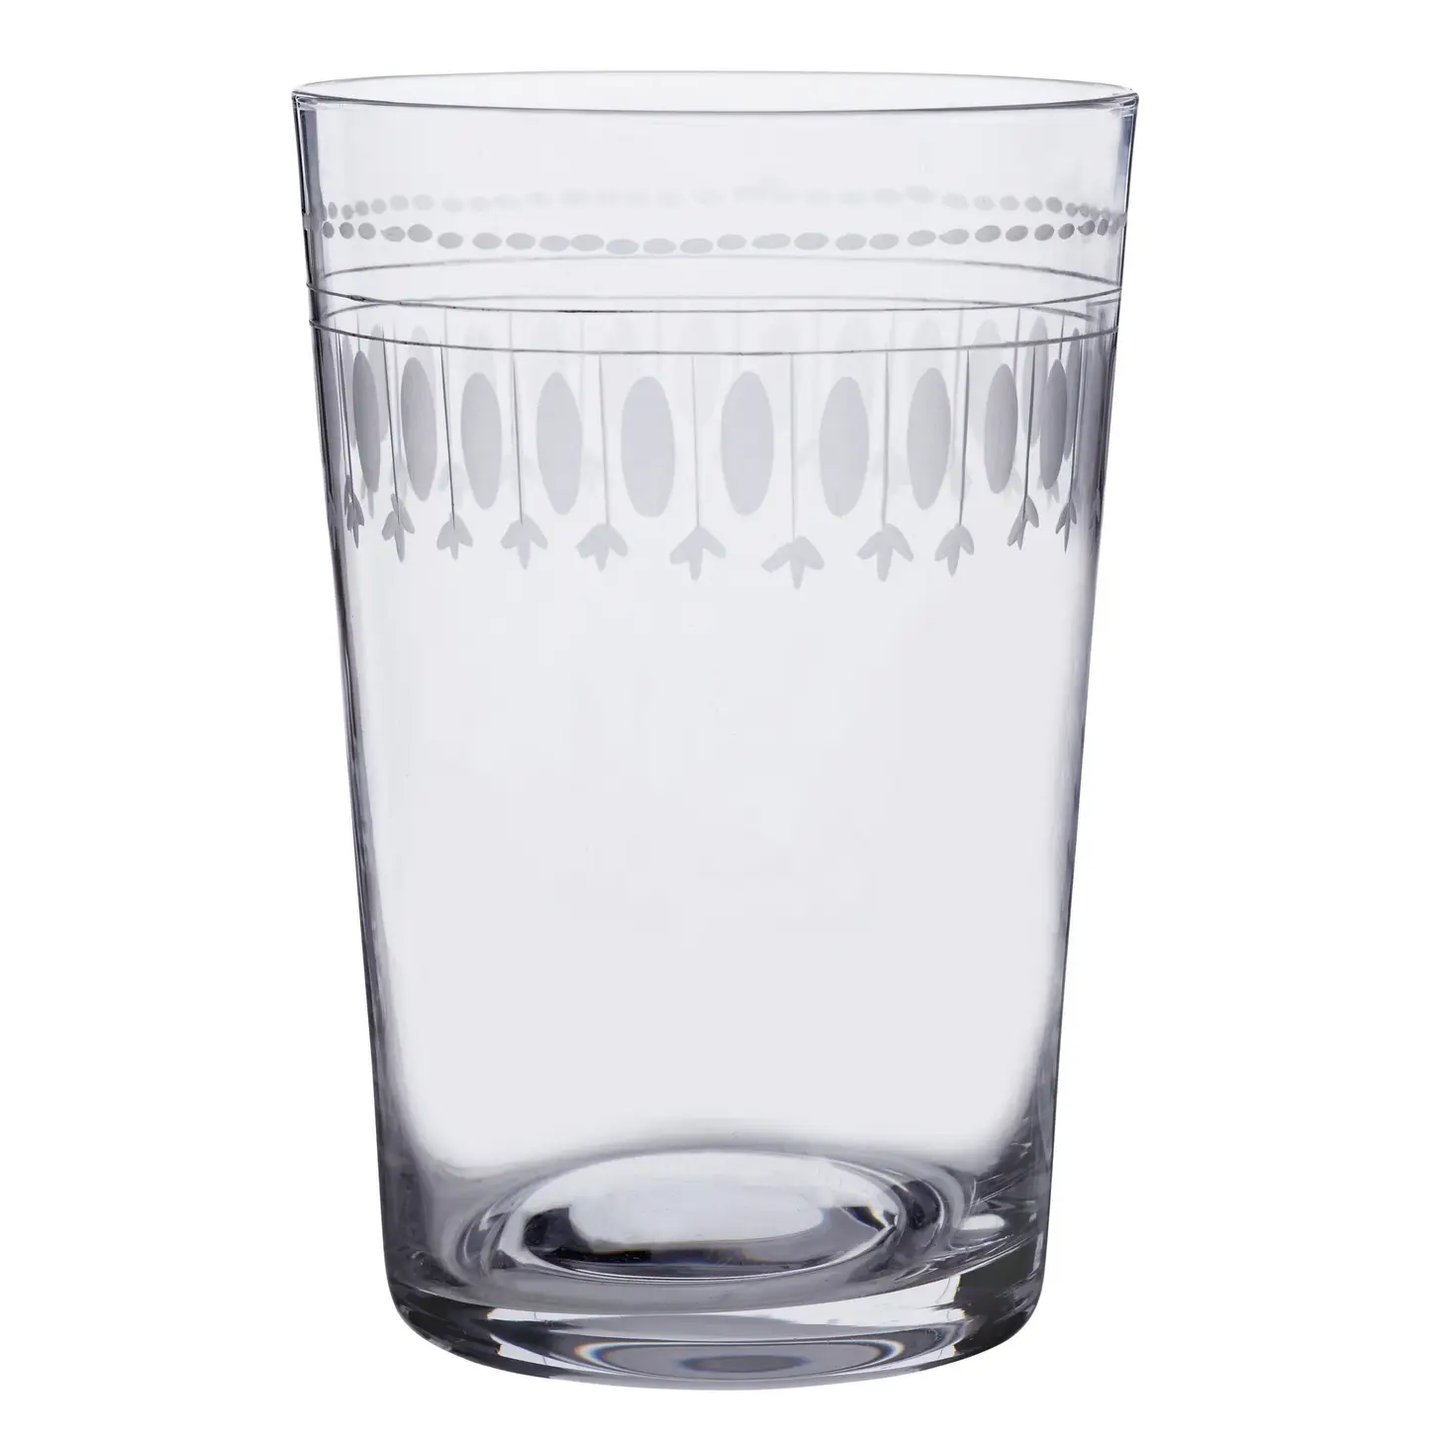 Crystal Tumblers with Ovals Design | Set of 2